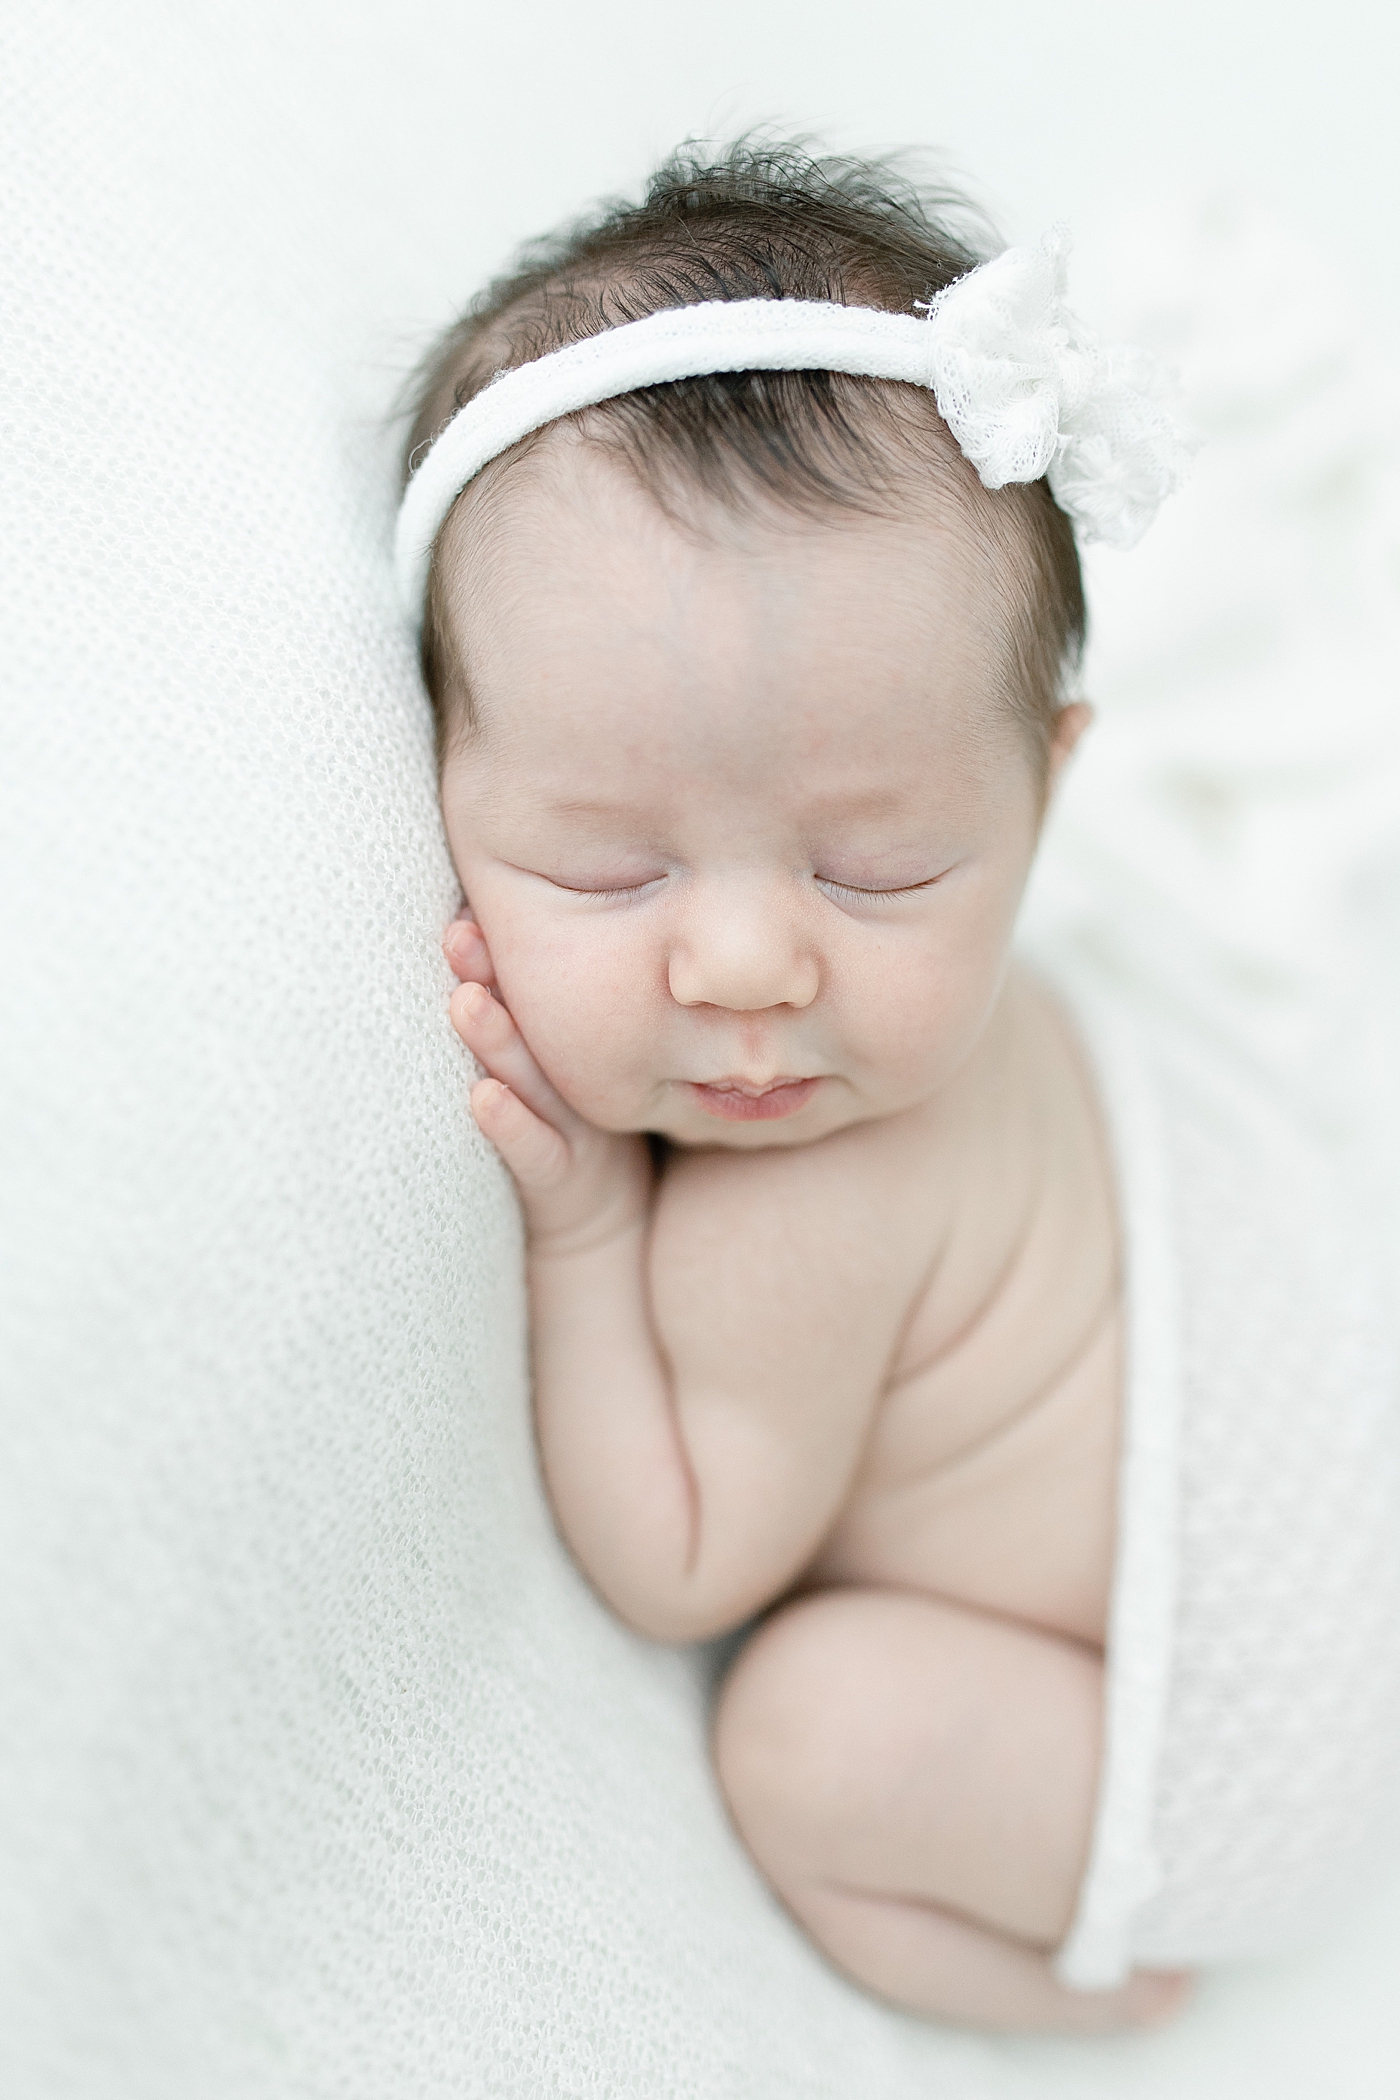 Baby girl with pouty lips during newborn session. Photo by Little Sunshine Photography